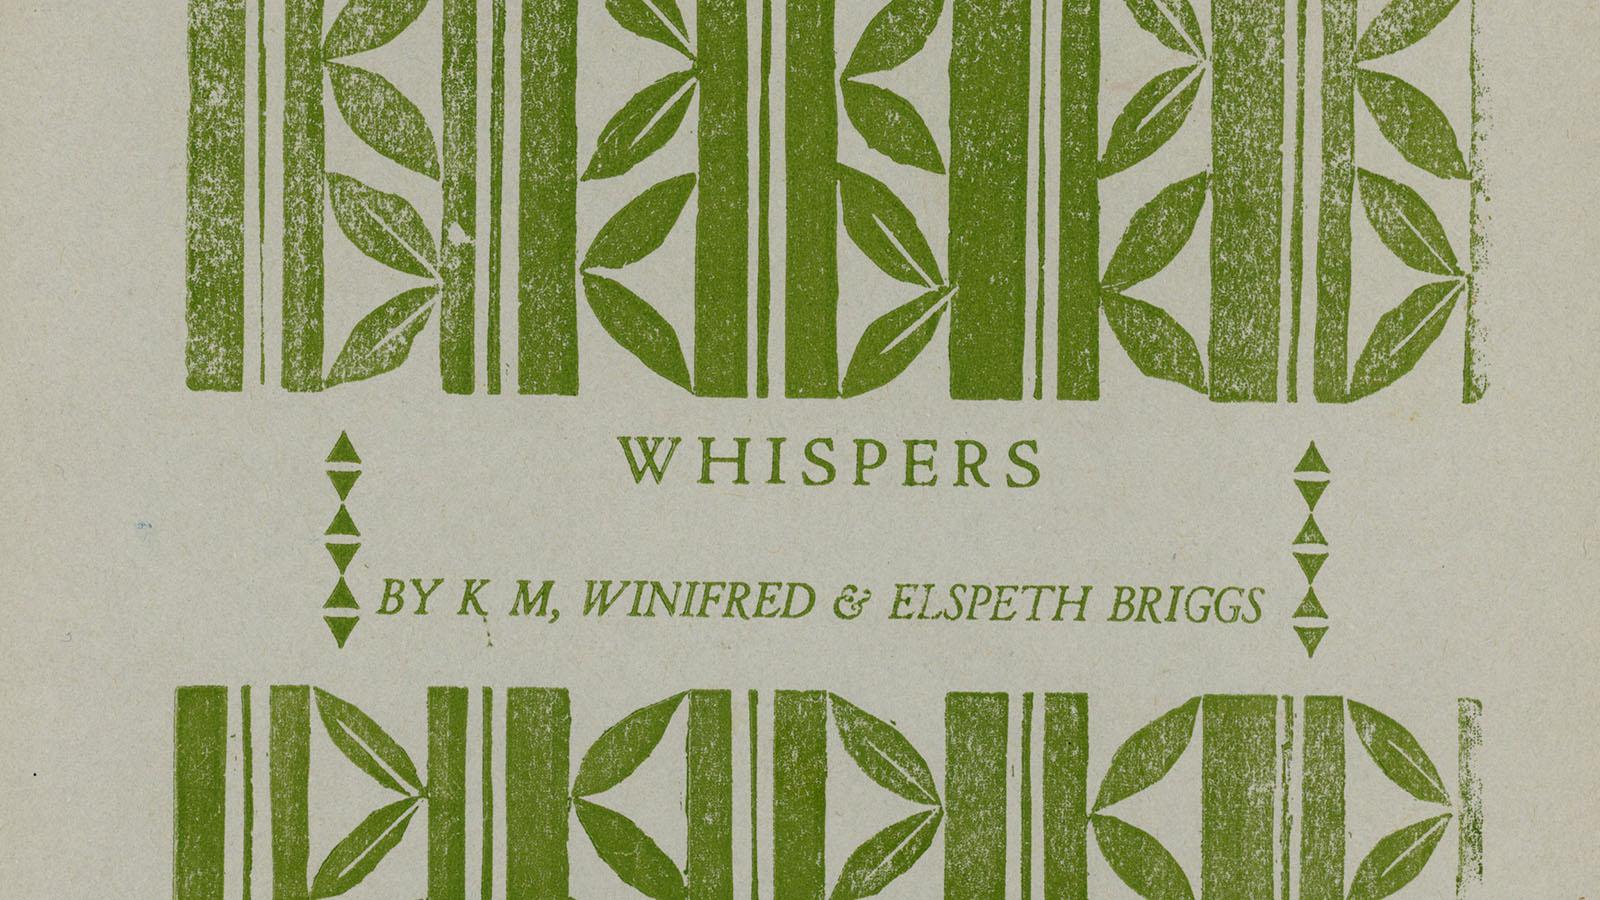 Front Cover of Capricornus Publication, "Whispers" by KM, Winifred & Eslpeth Briggs